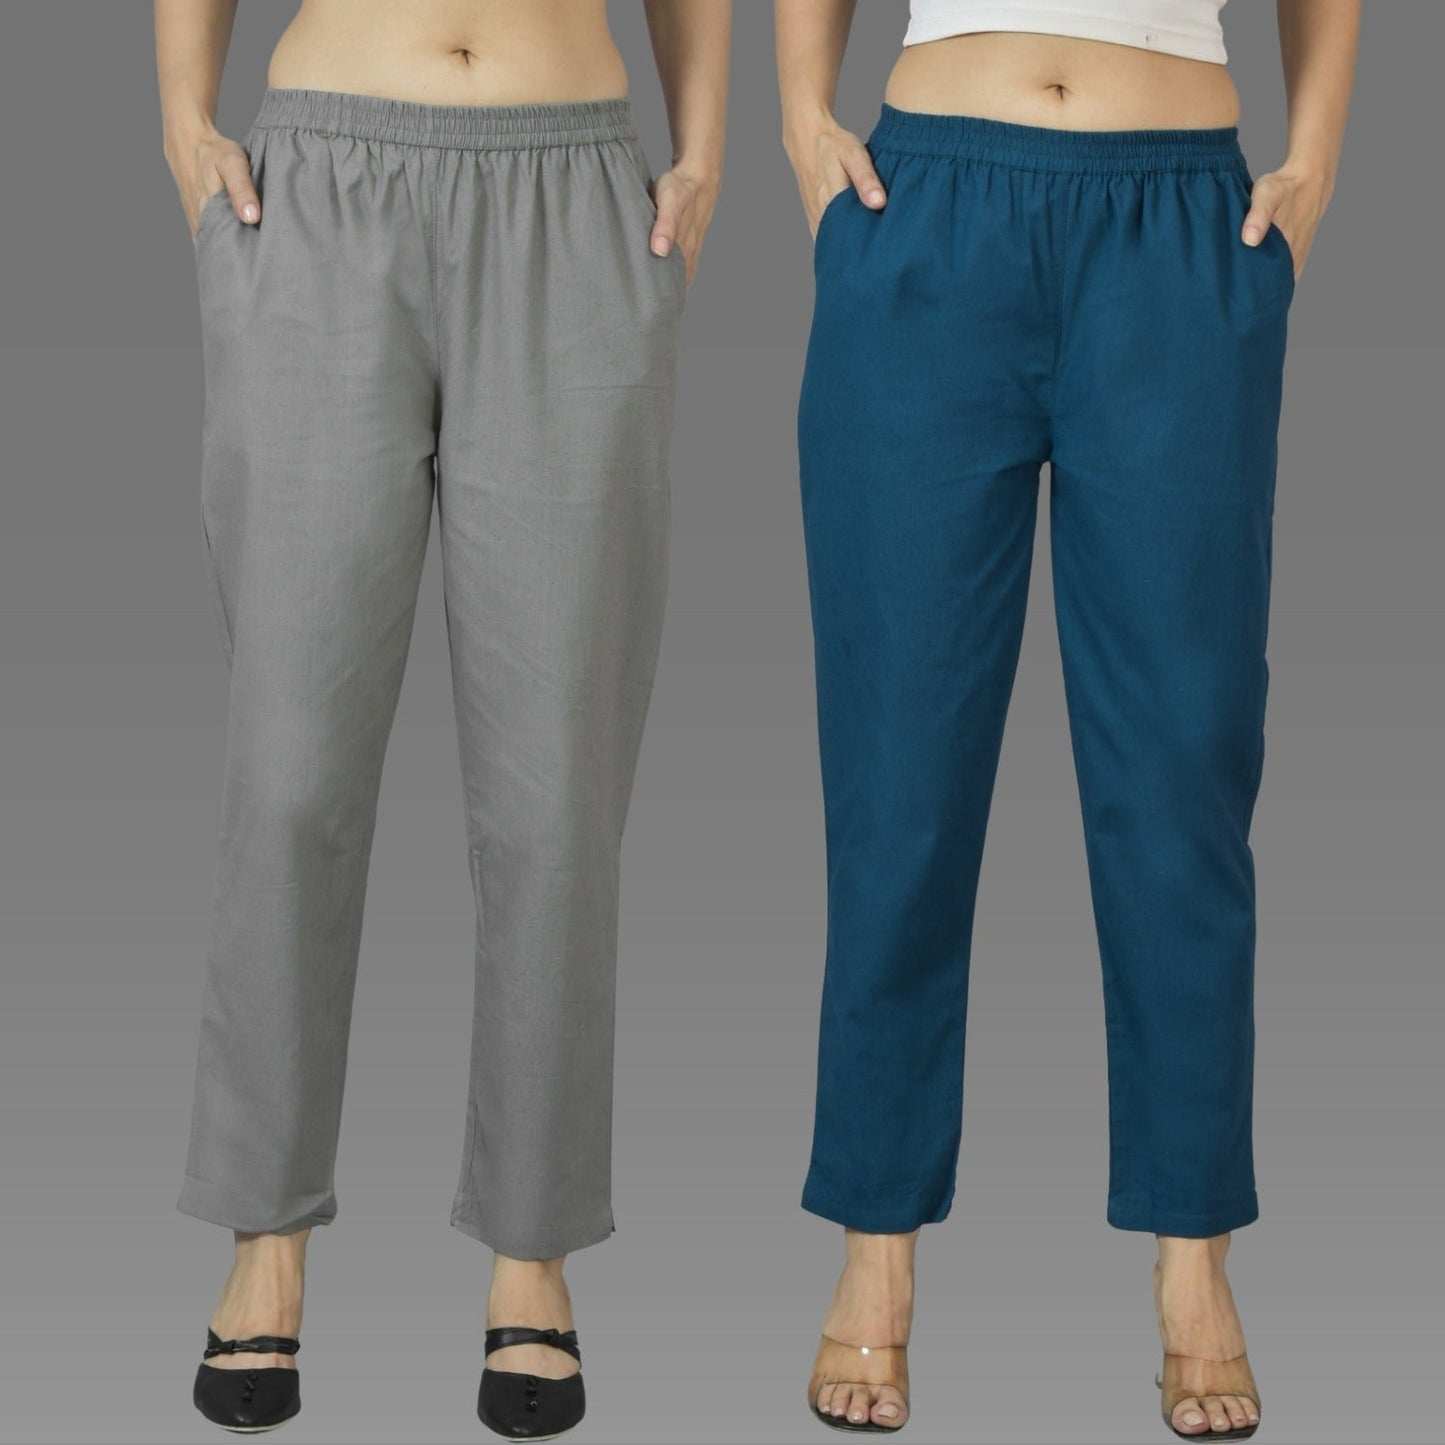 Pack Of 2 Womens Grey And Teal Blue Deep Pocket Fully Elastic Cotton Trouser